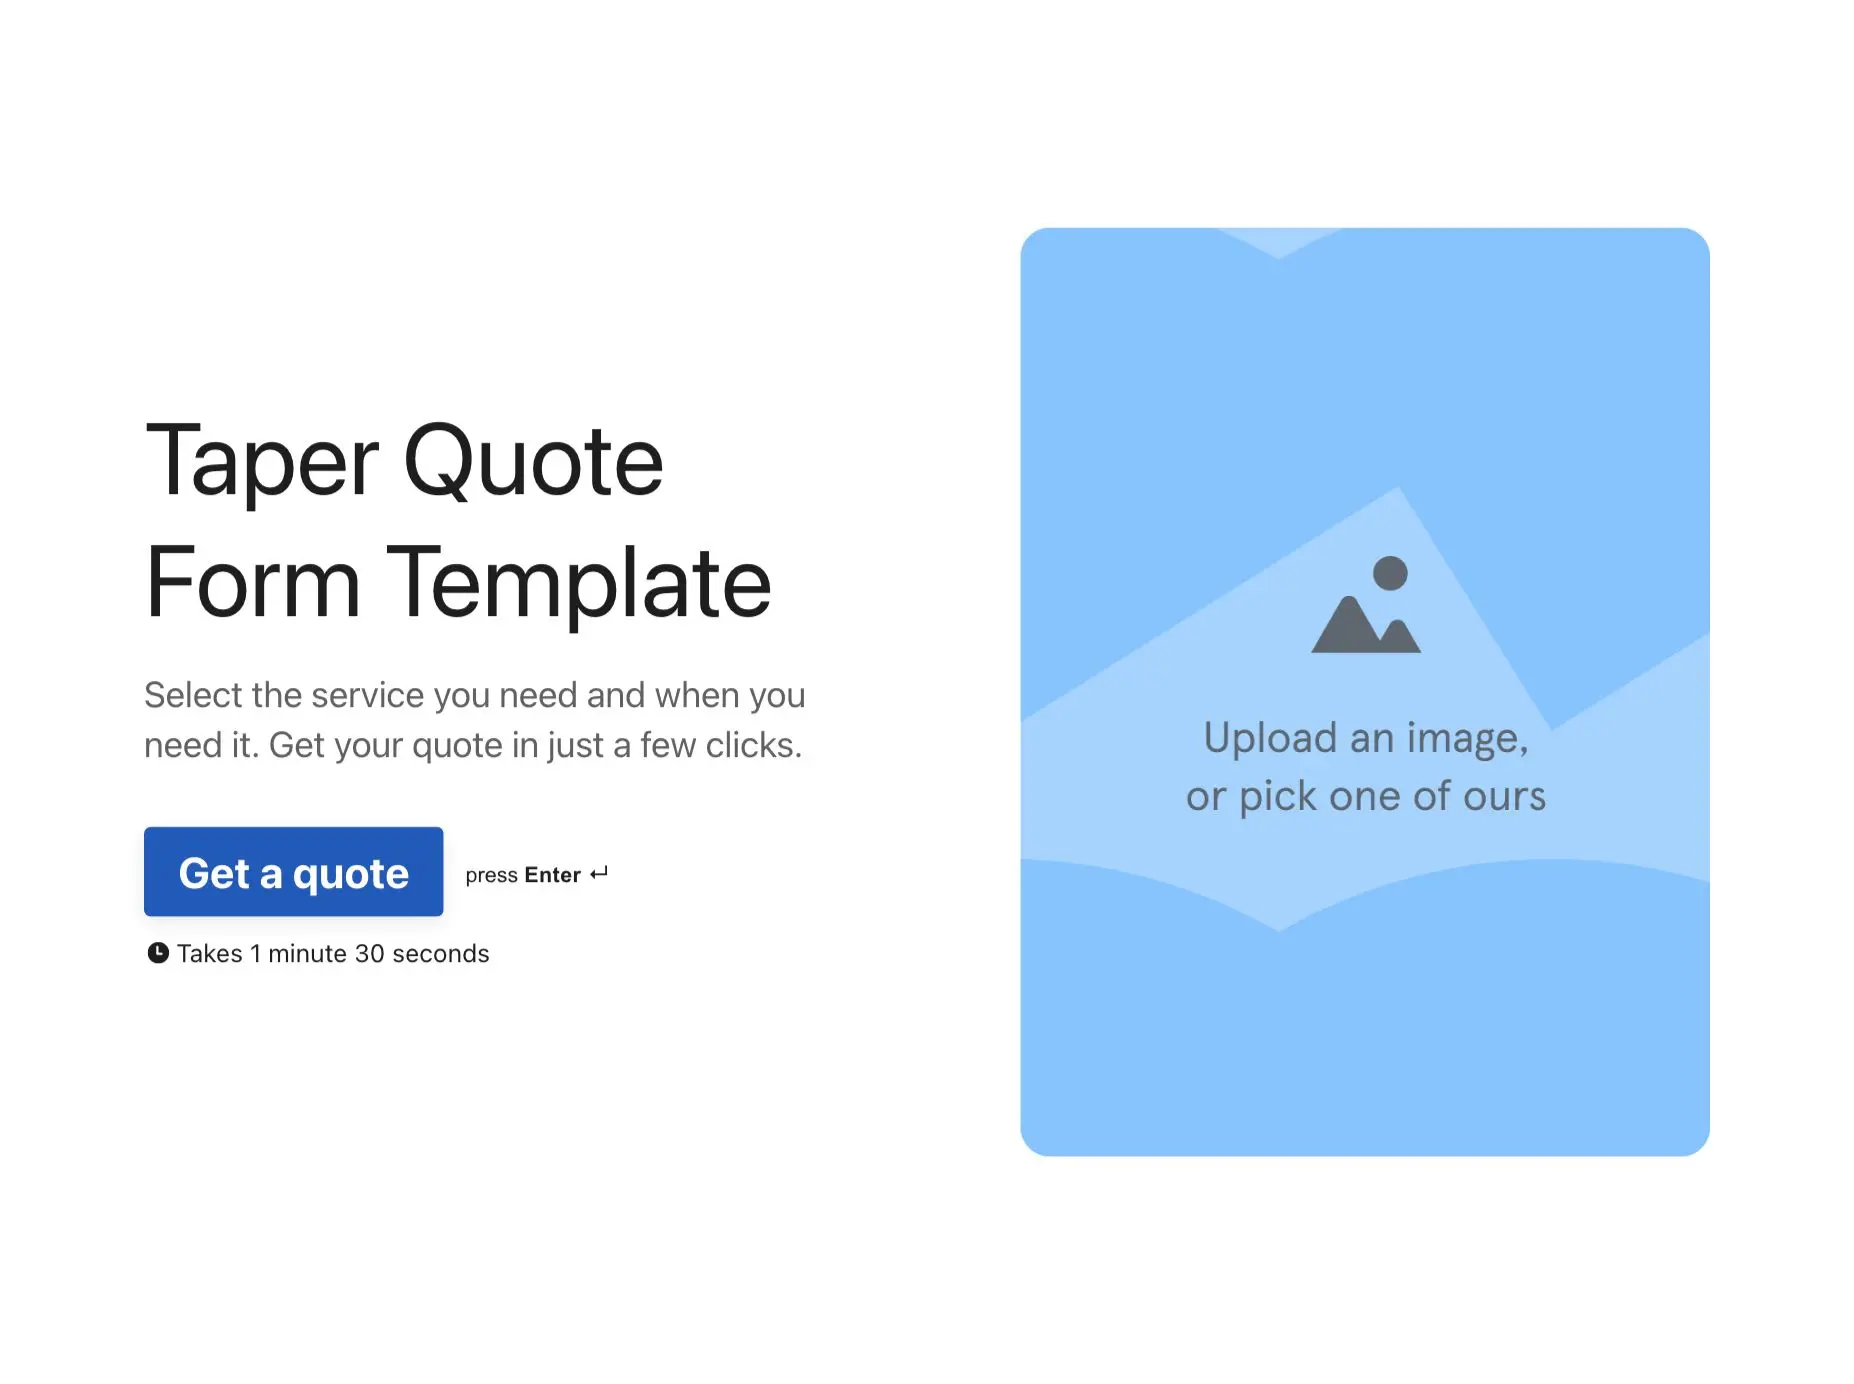 Taper Quote Form Template Hero